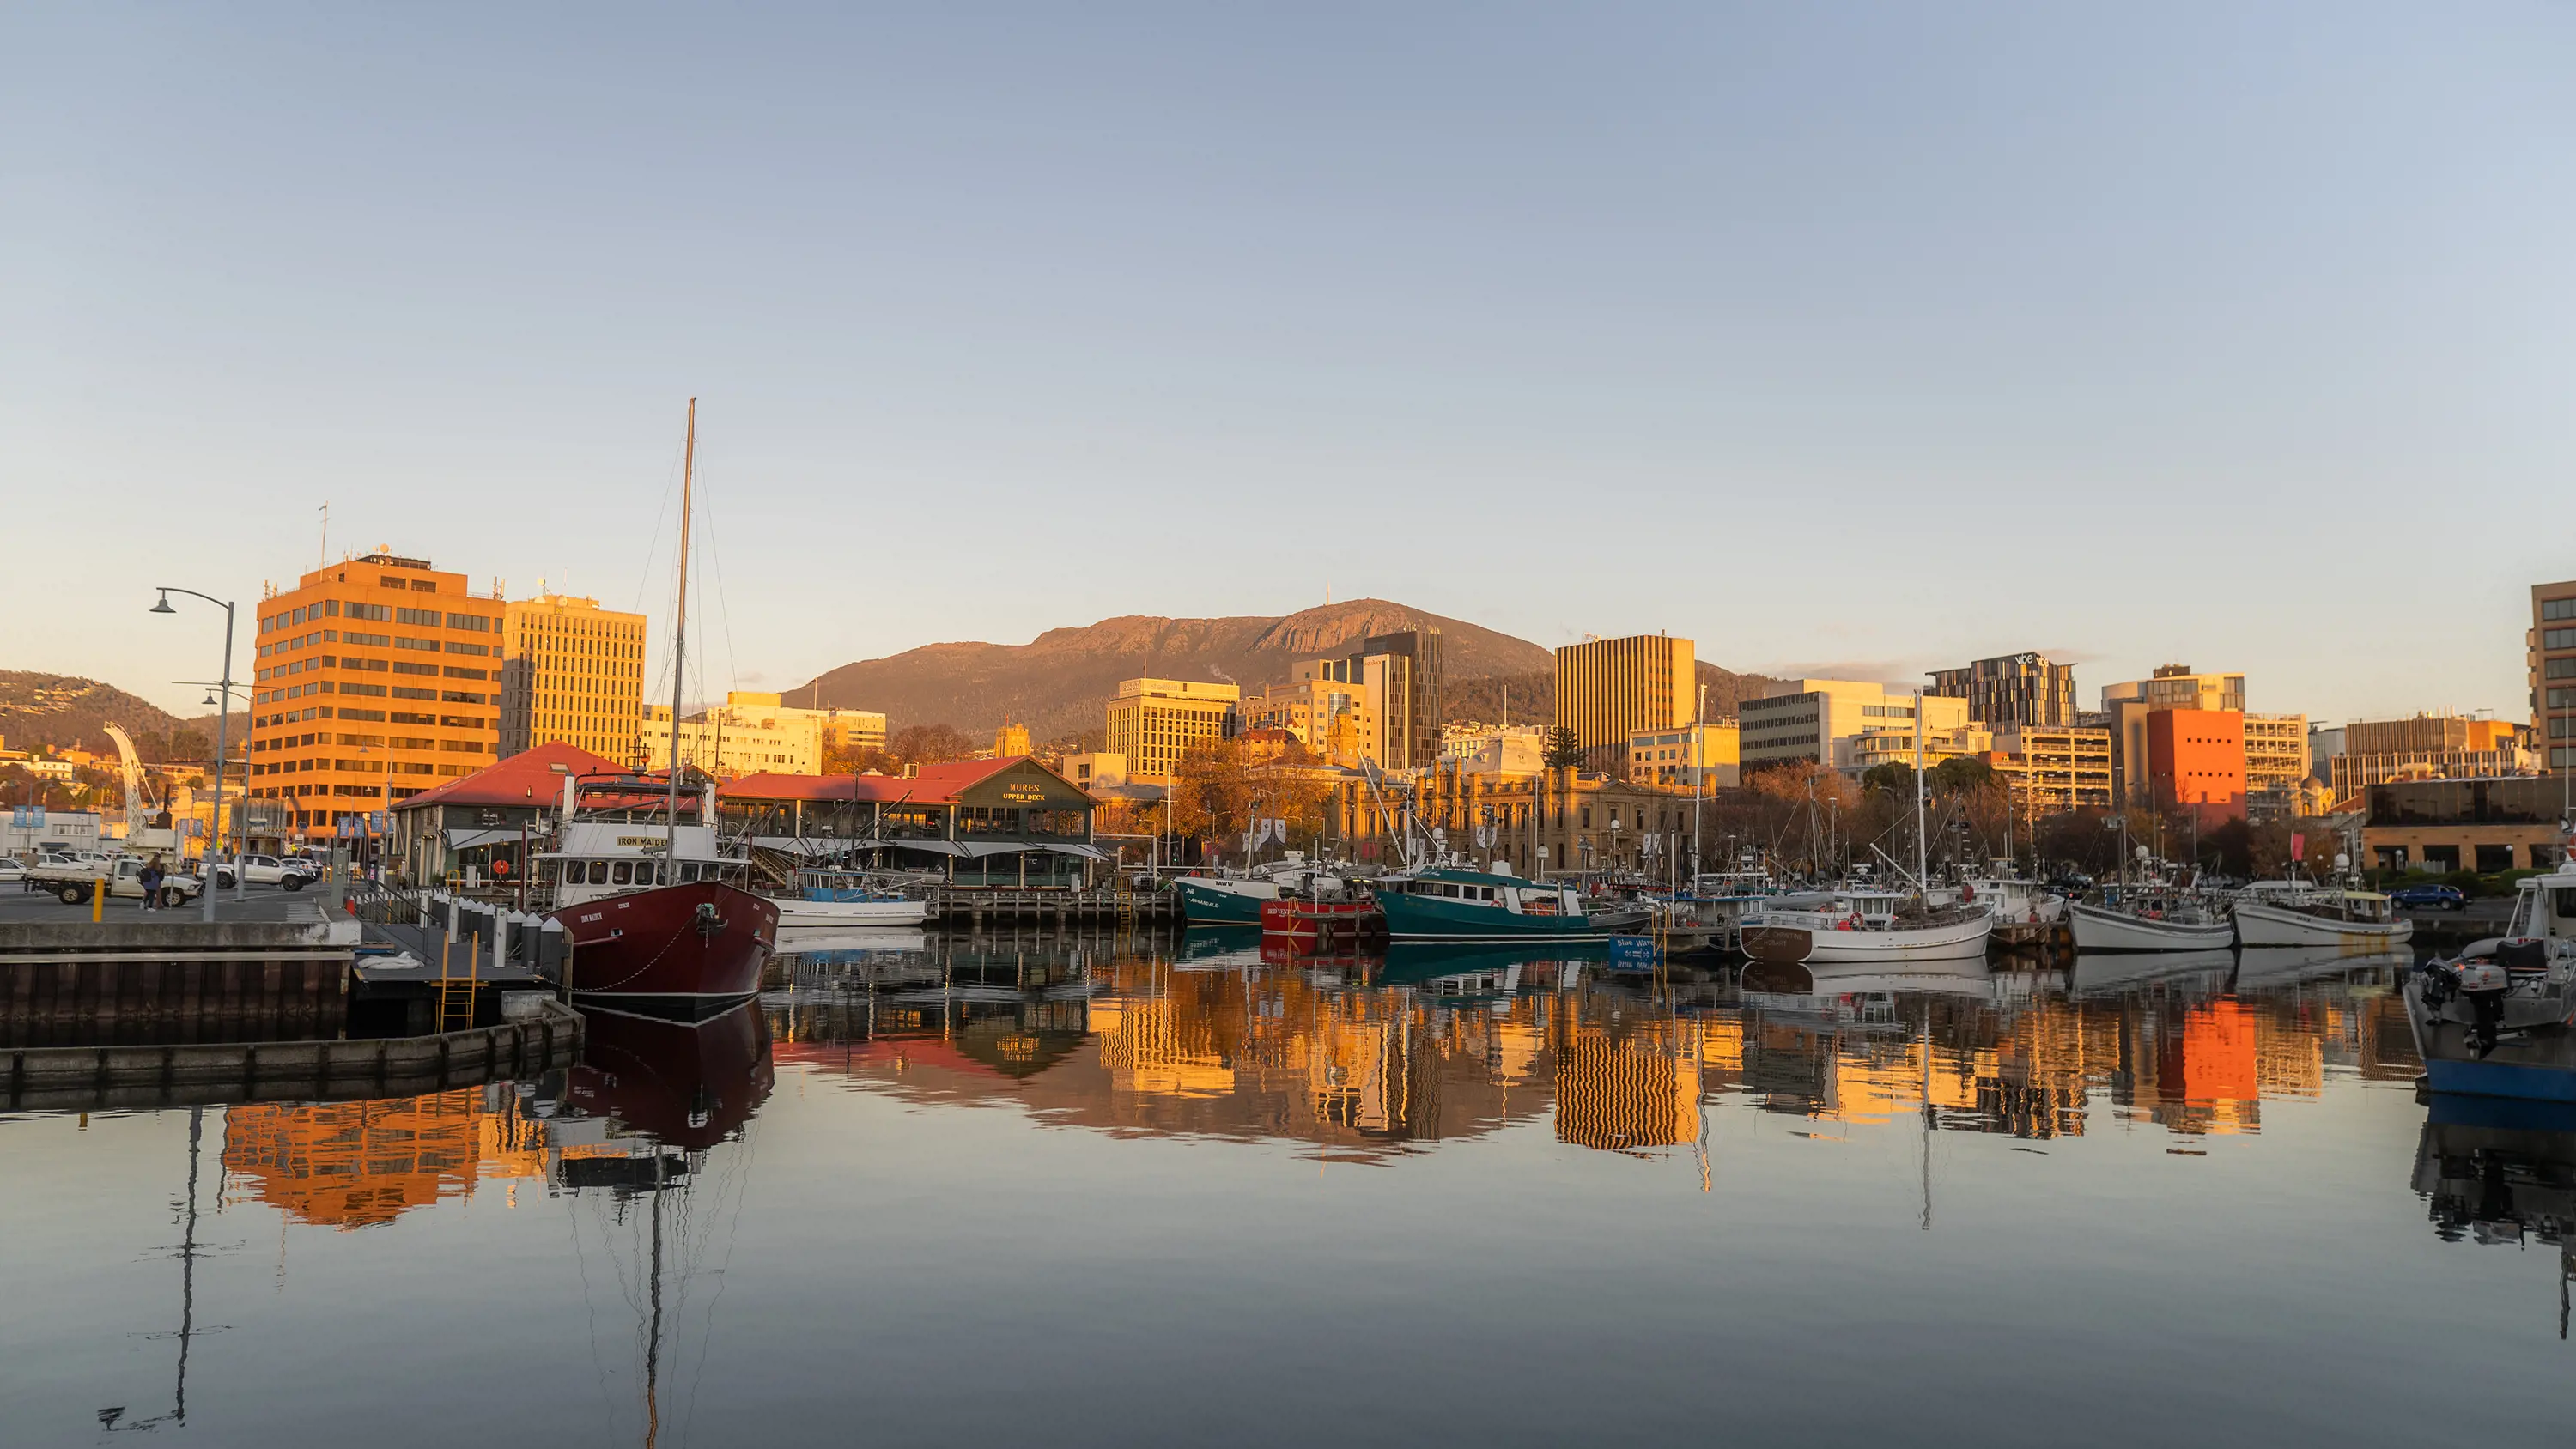 Hobart city at sunrise, reflected in the water of the waterfront on a clear day.